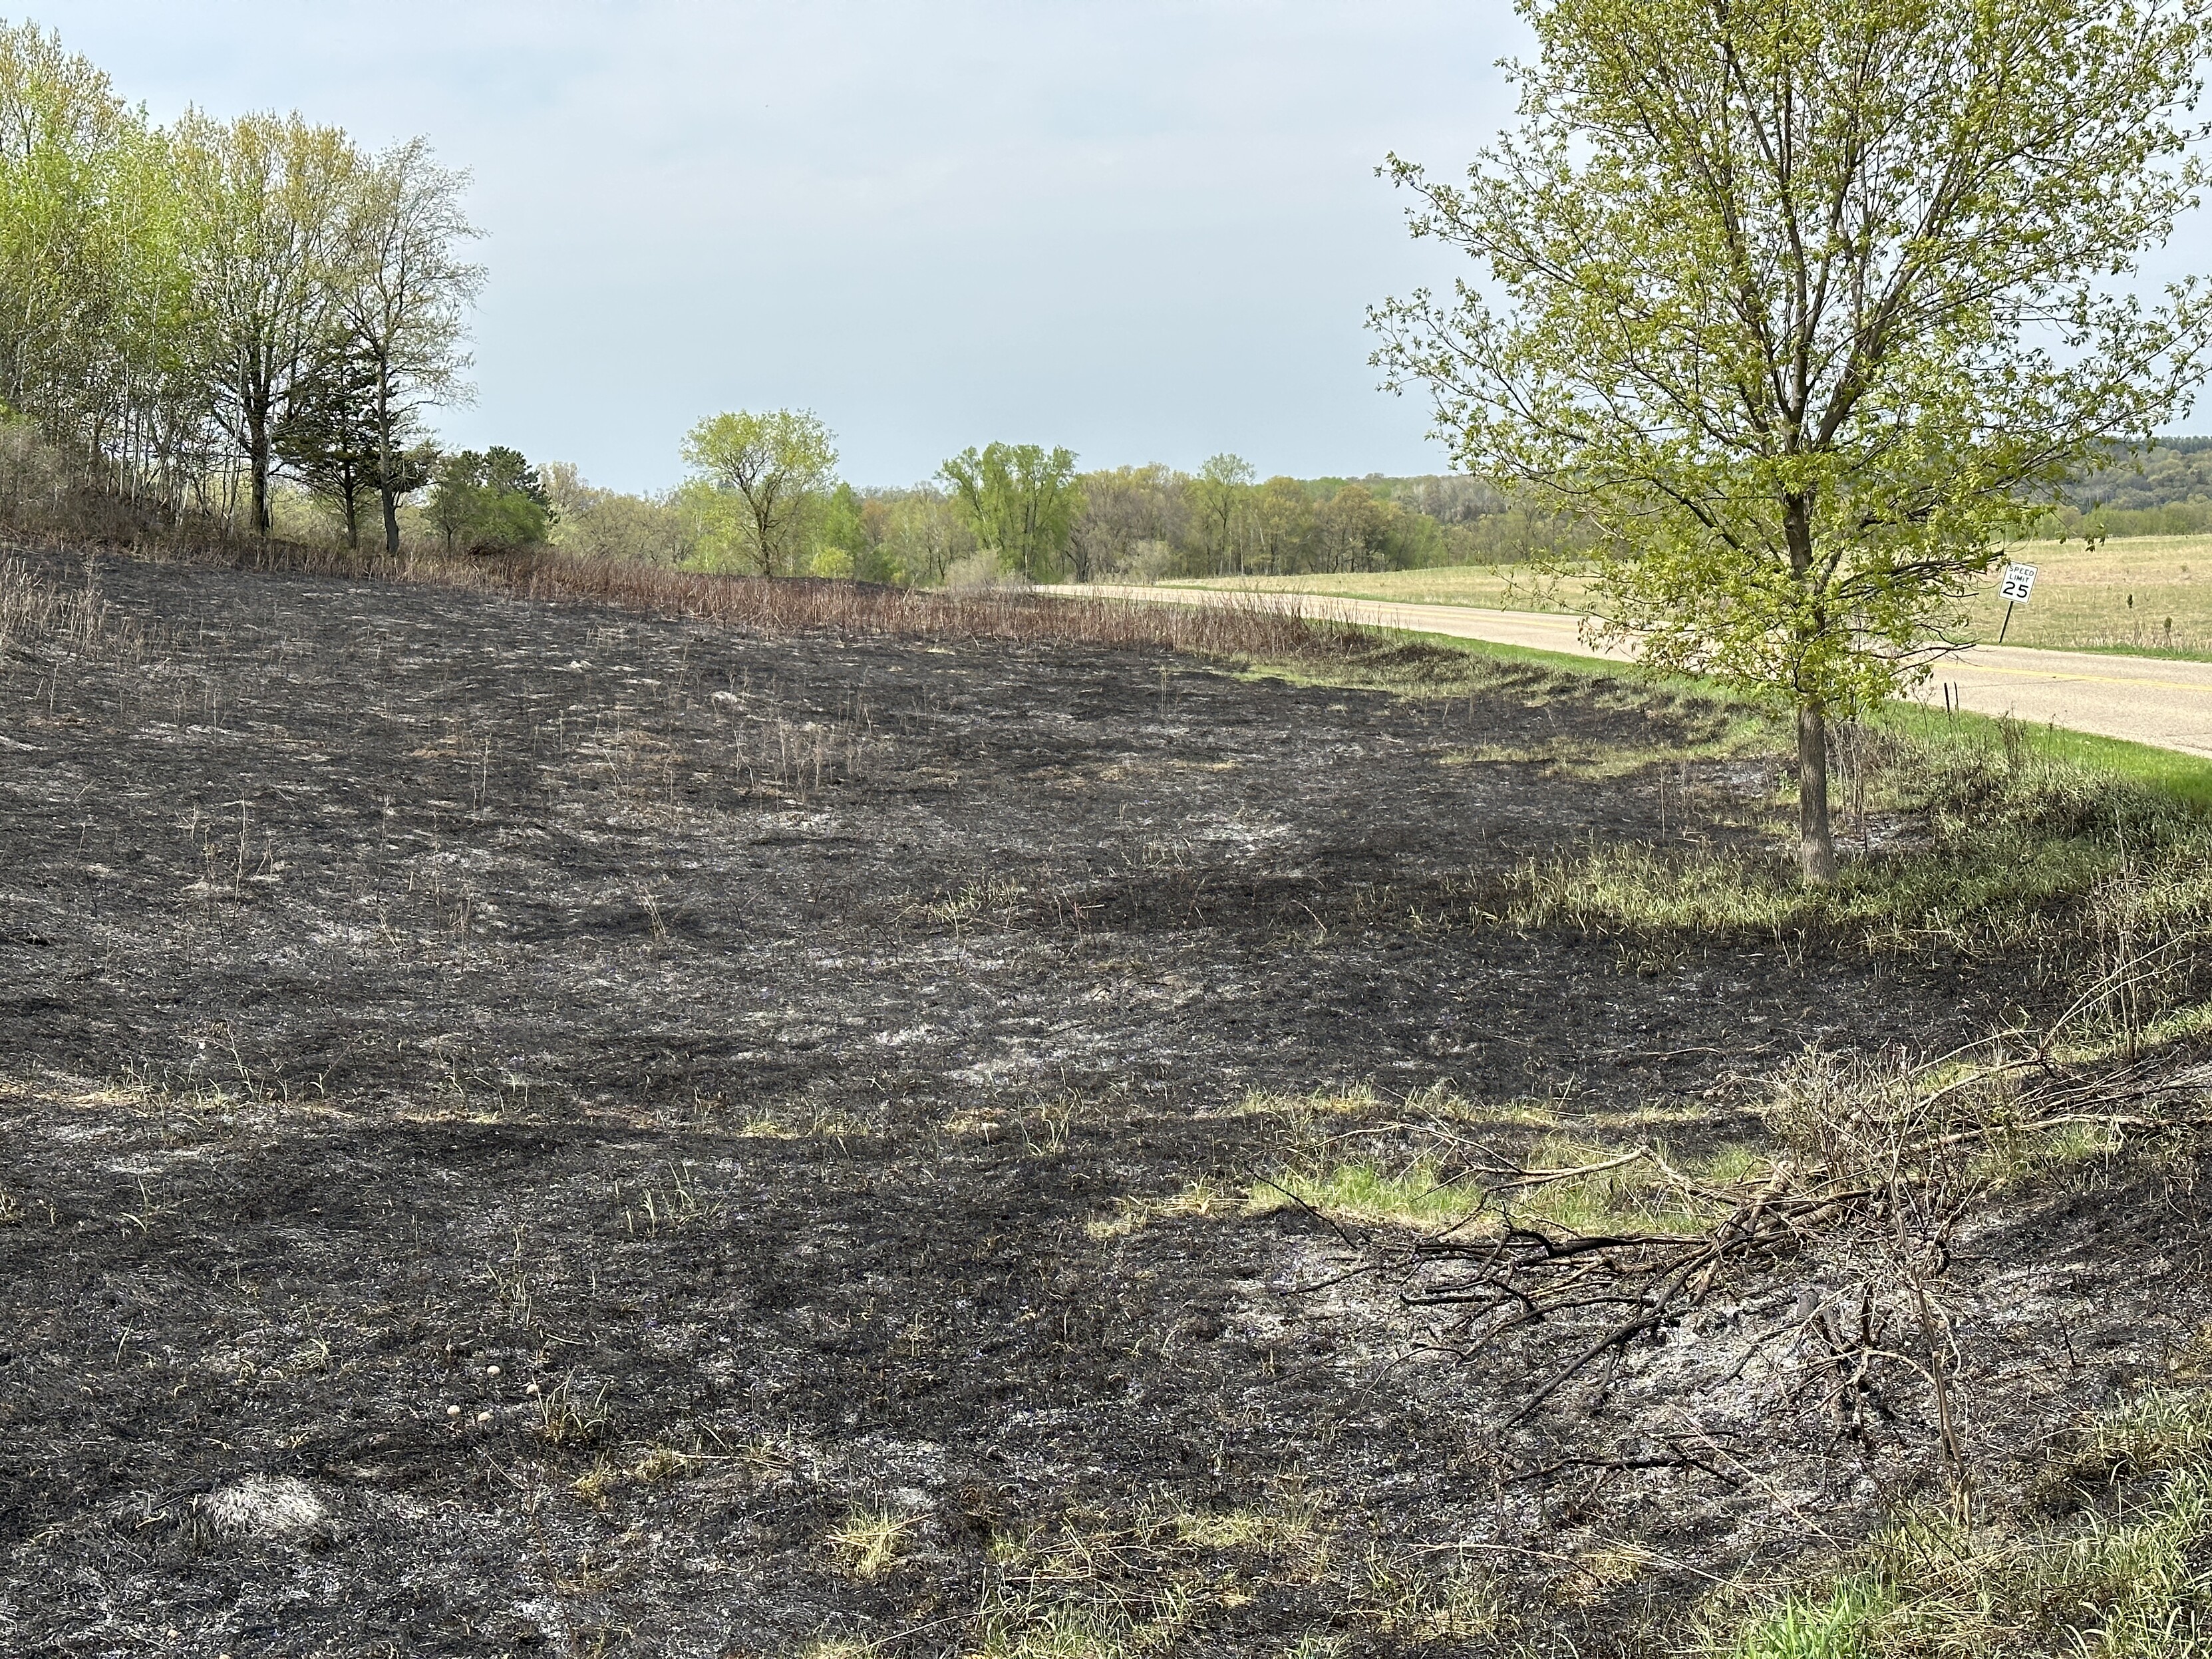 Burned out prairie section of Afton State Park in Minnesota